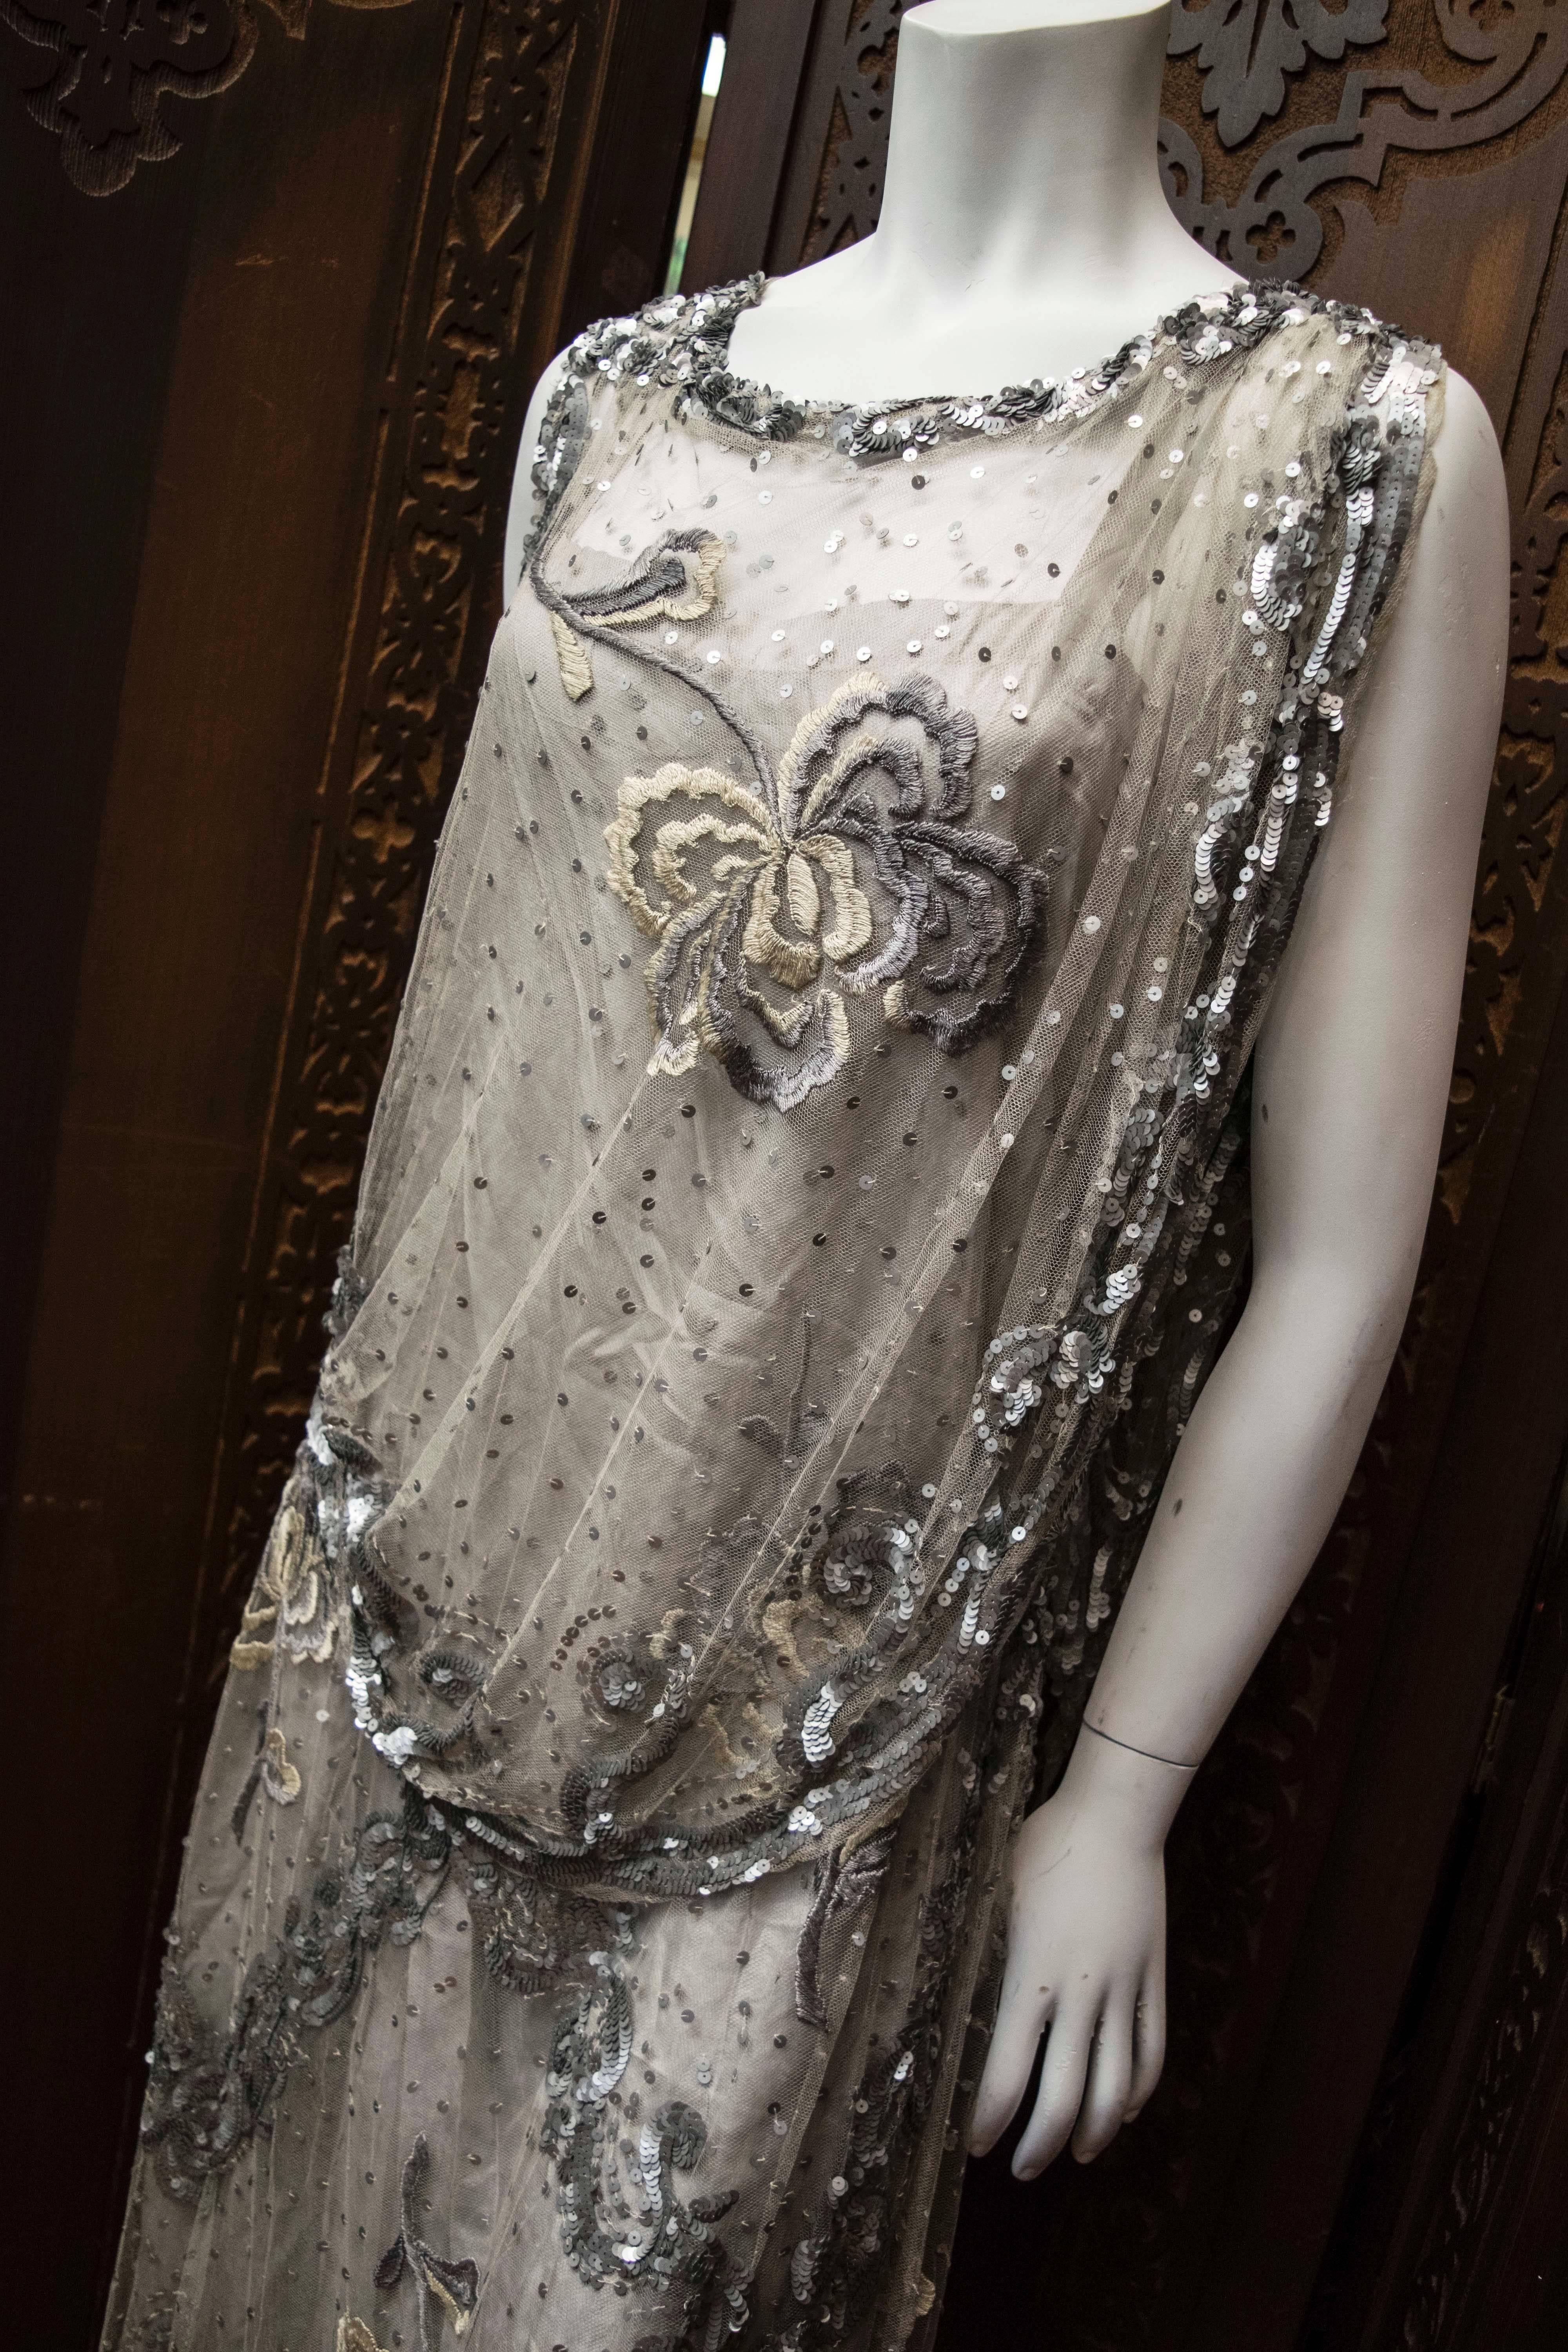 1920s Silver Lace Sequinned Dress

One of the most beautiful 1920s dresses we've ever possessed, completely hand embroidered and hand sequinned with its original silk silver slip. The dress's colour scheme features soft greys, silvers and pewter.